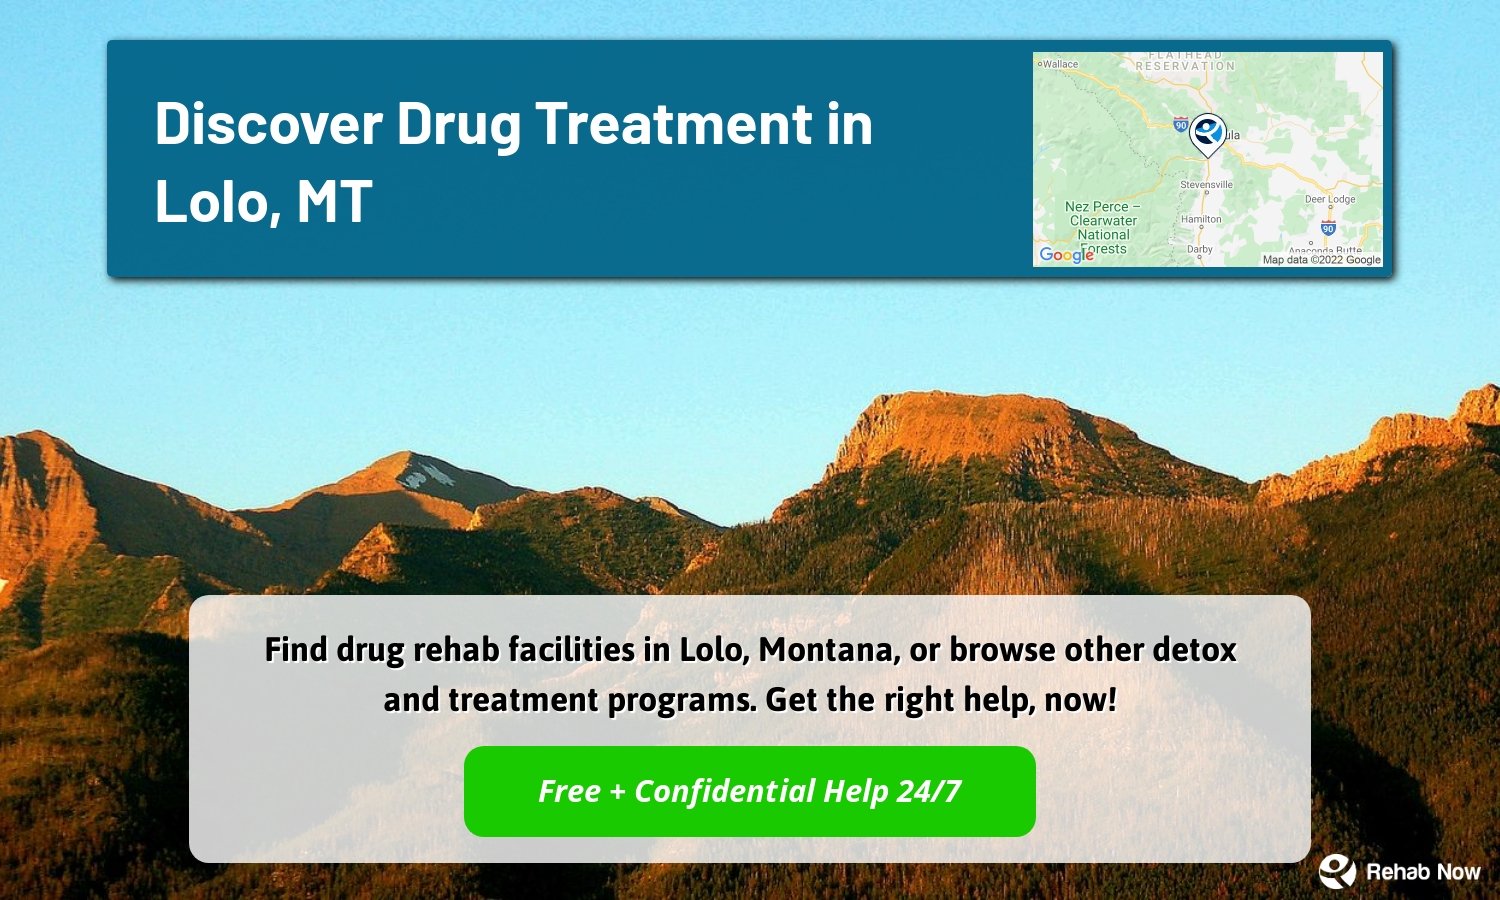 Find drug rehab facilities in Lolo, Montana, or browse other detox and treatment programs. Get the right help, now!